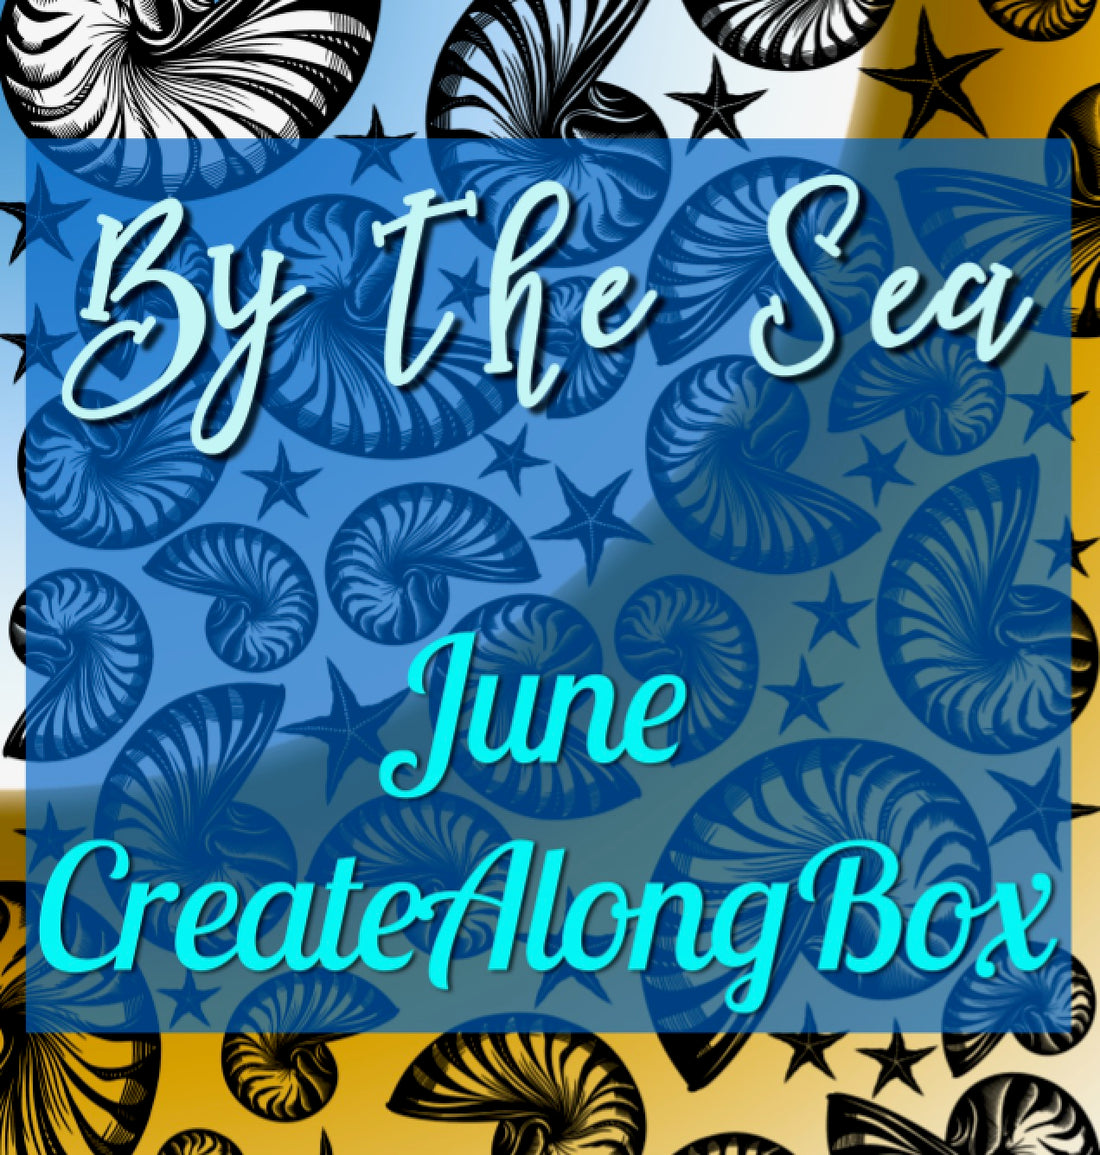 Create Along Box for June Ships Today!